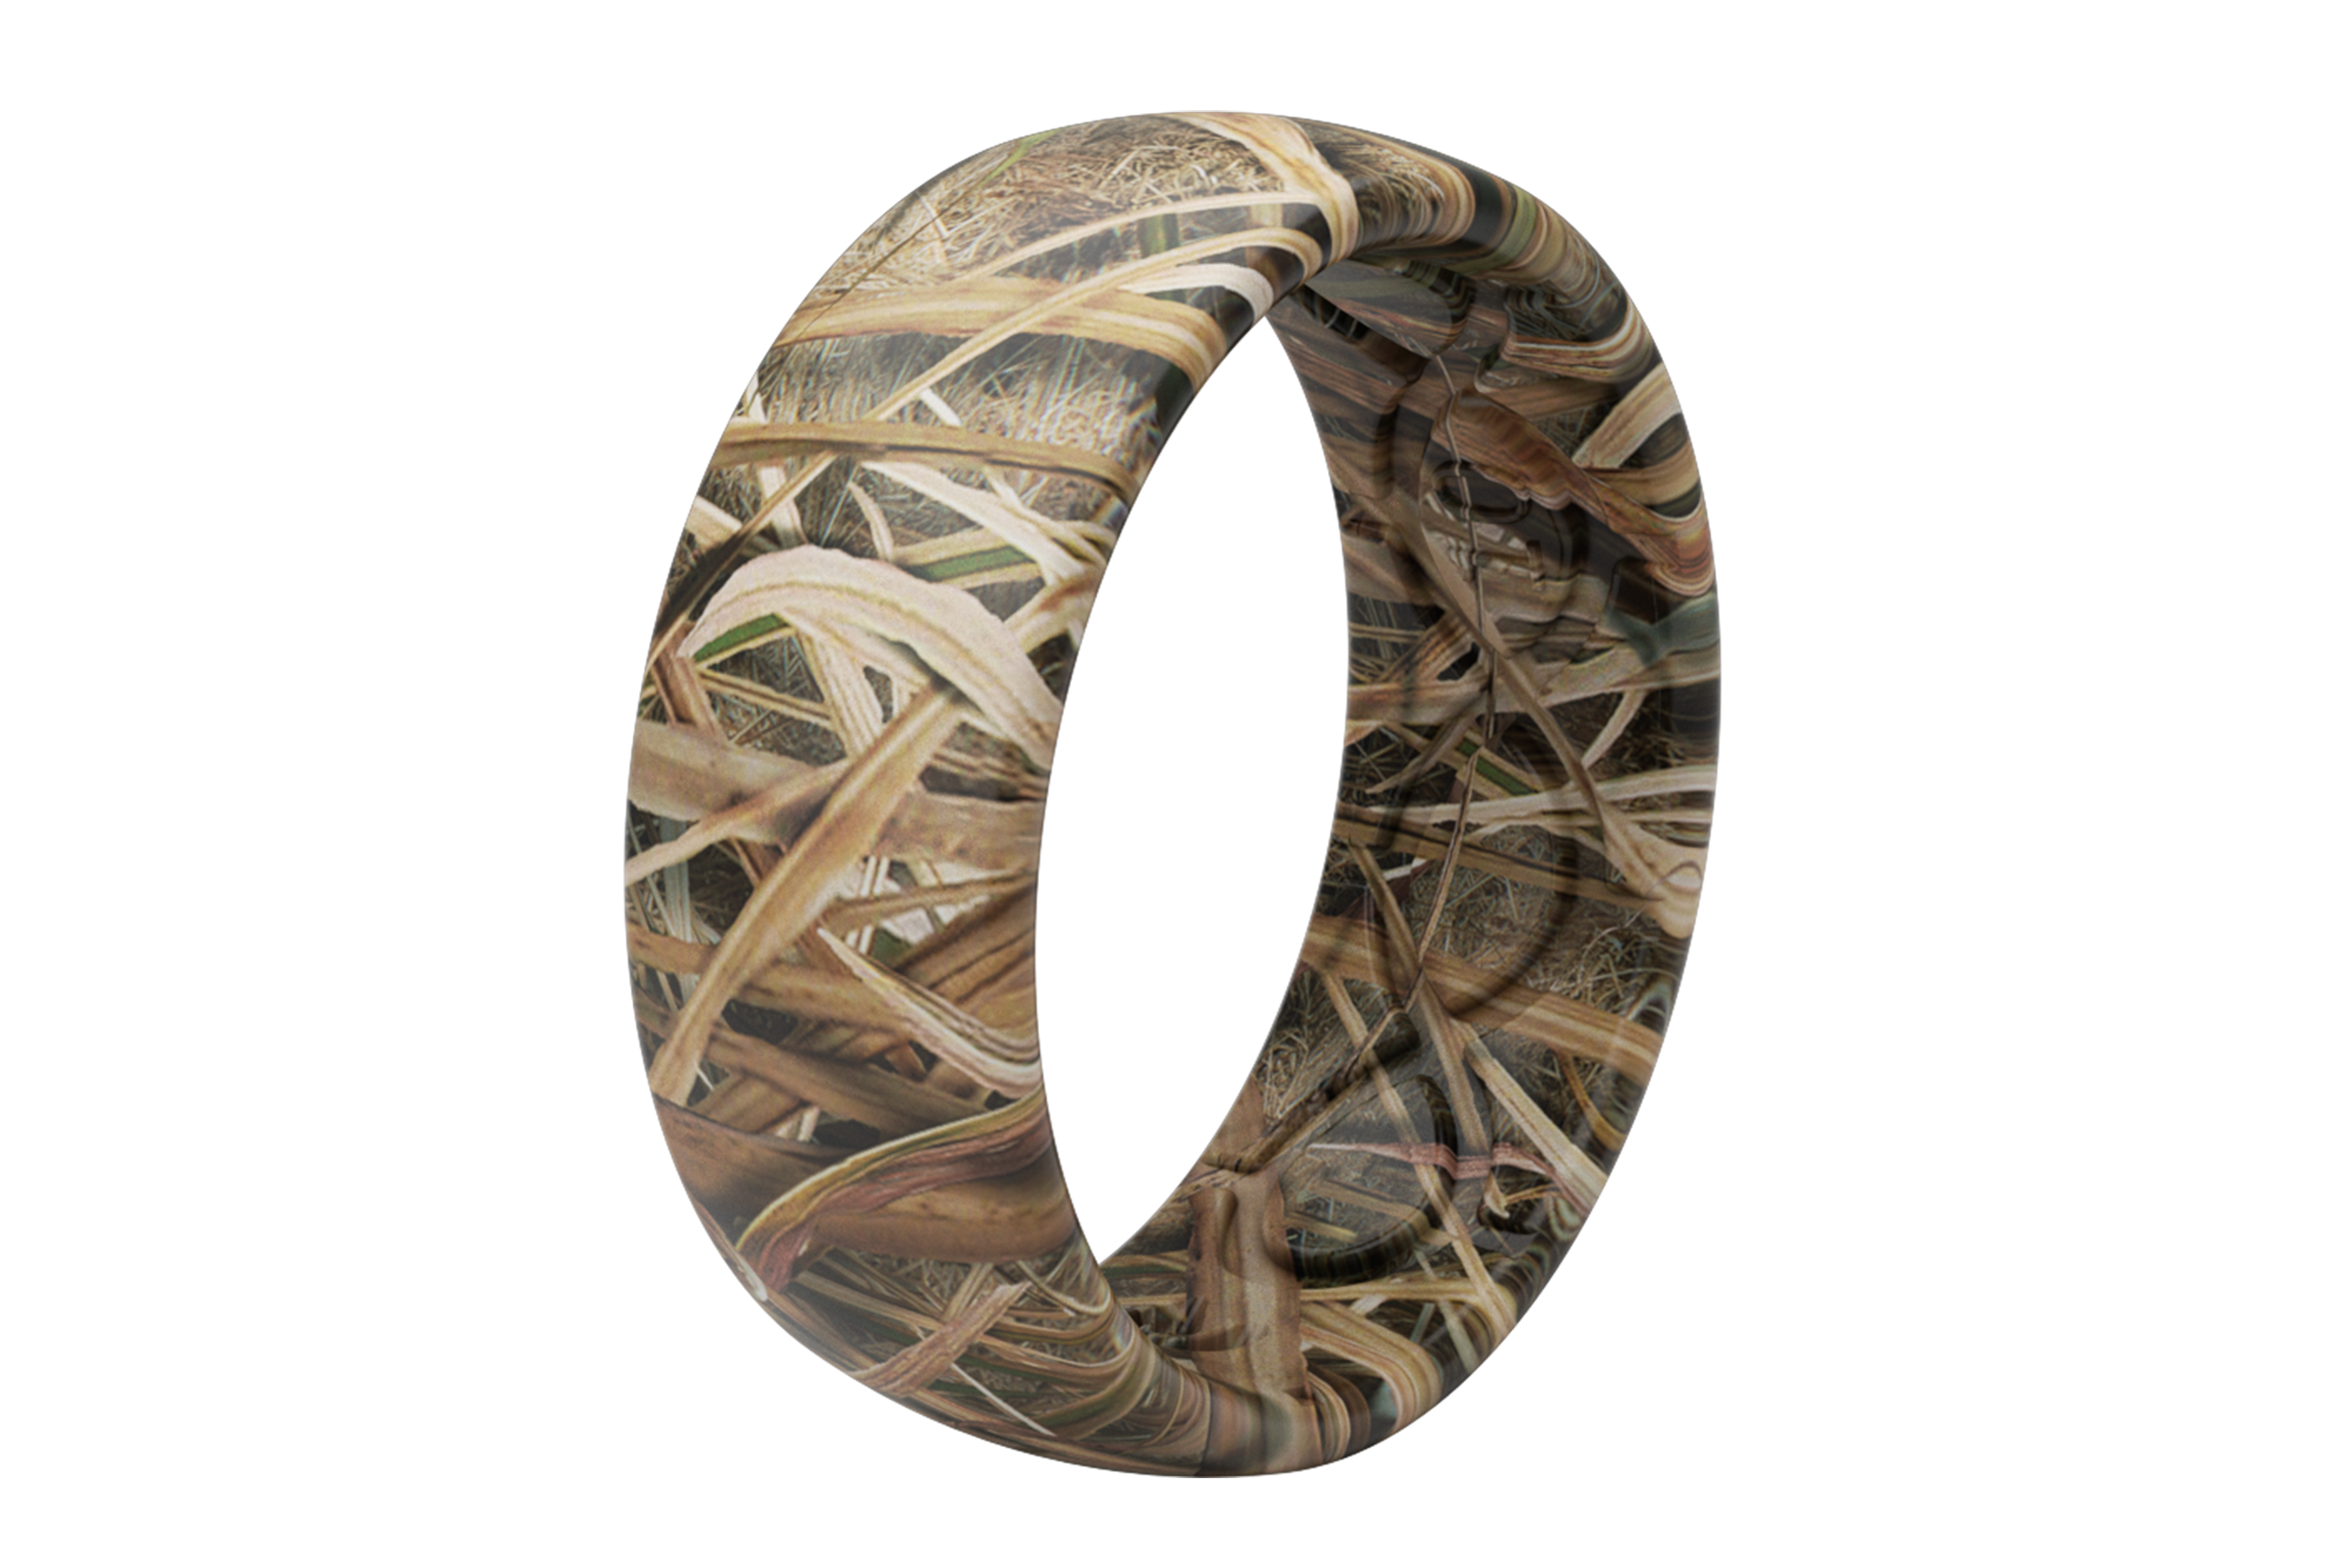 Original Camo Mossy Oak Blades viewed on its side viewed on its side